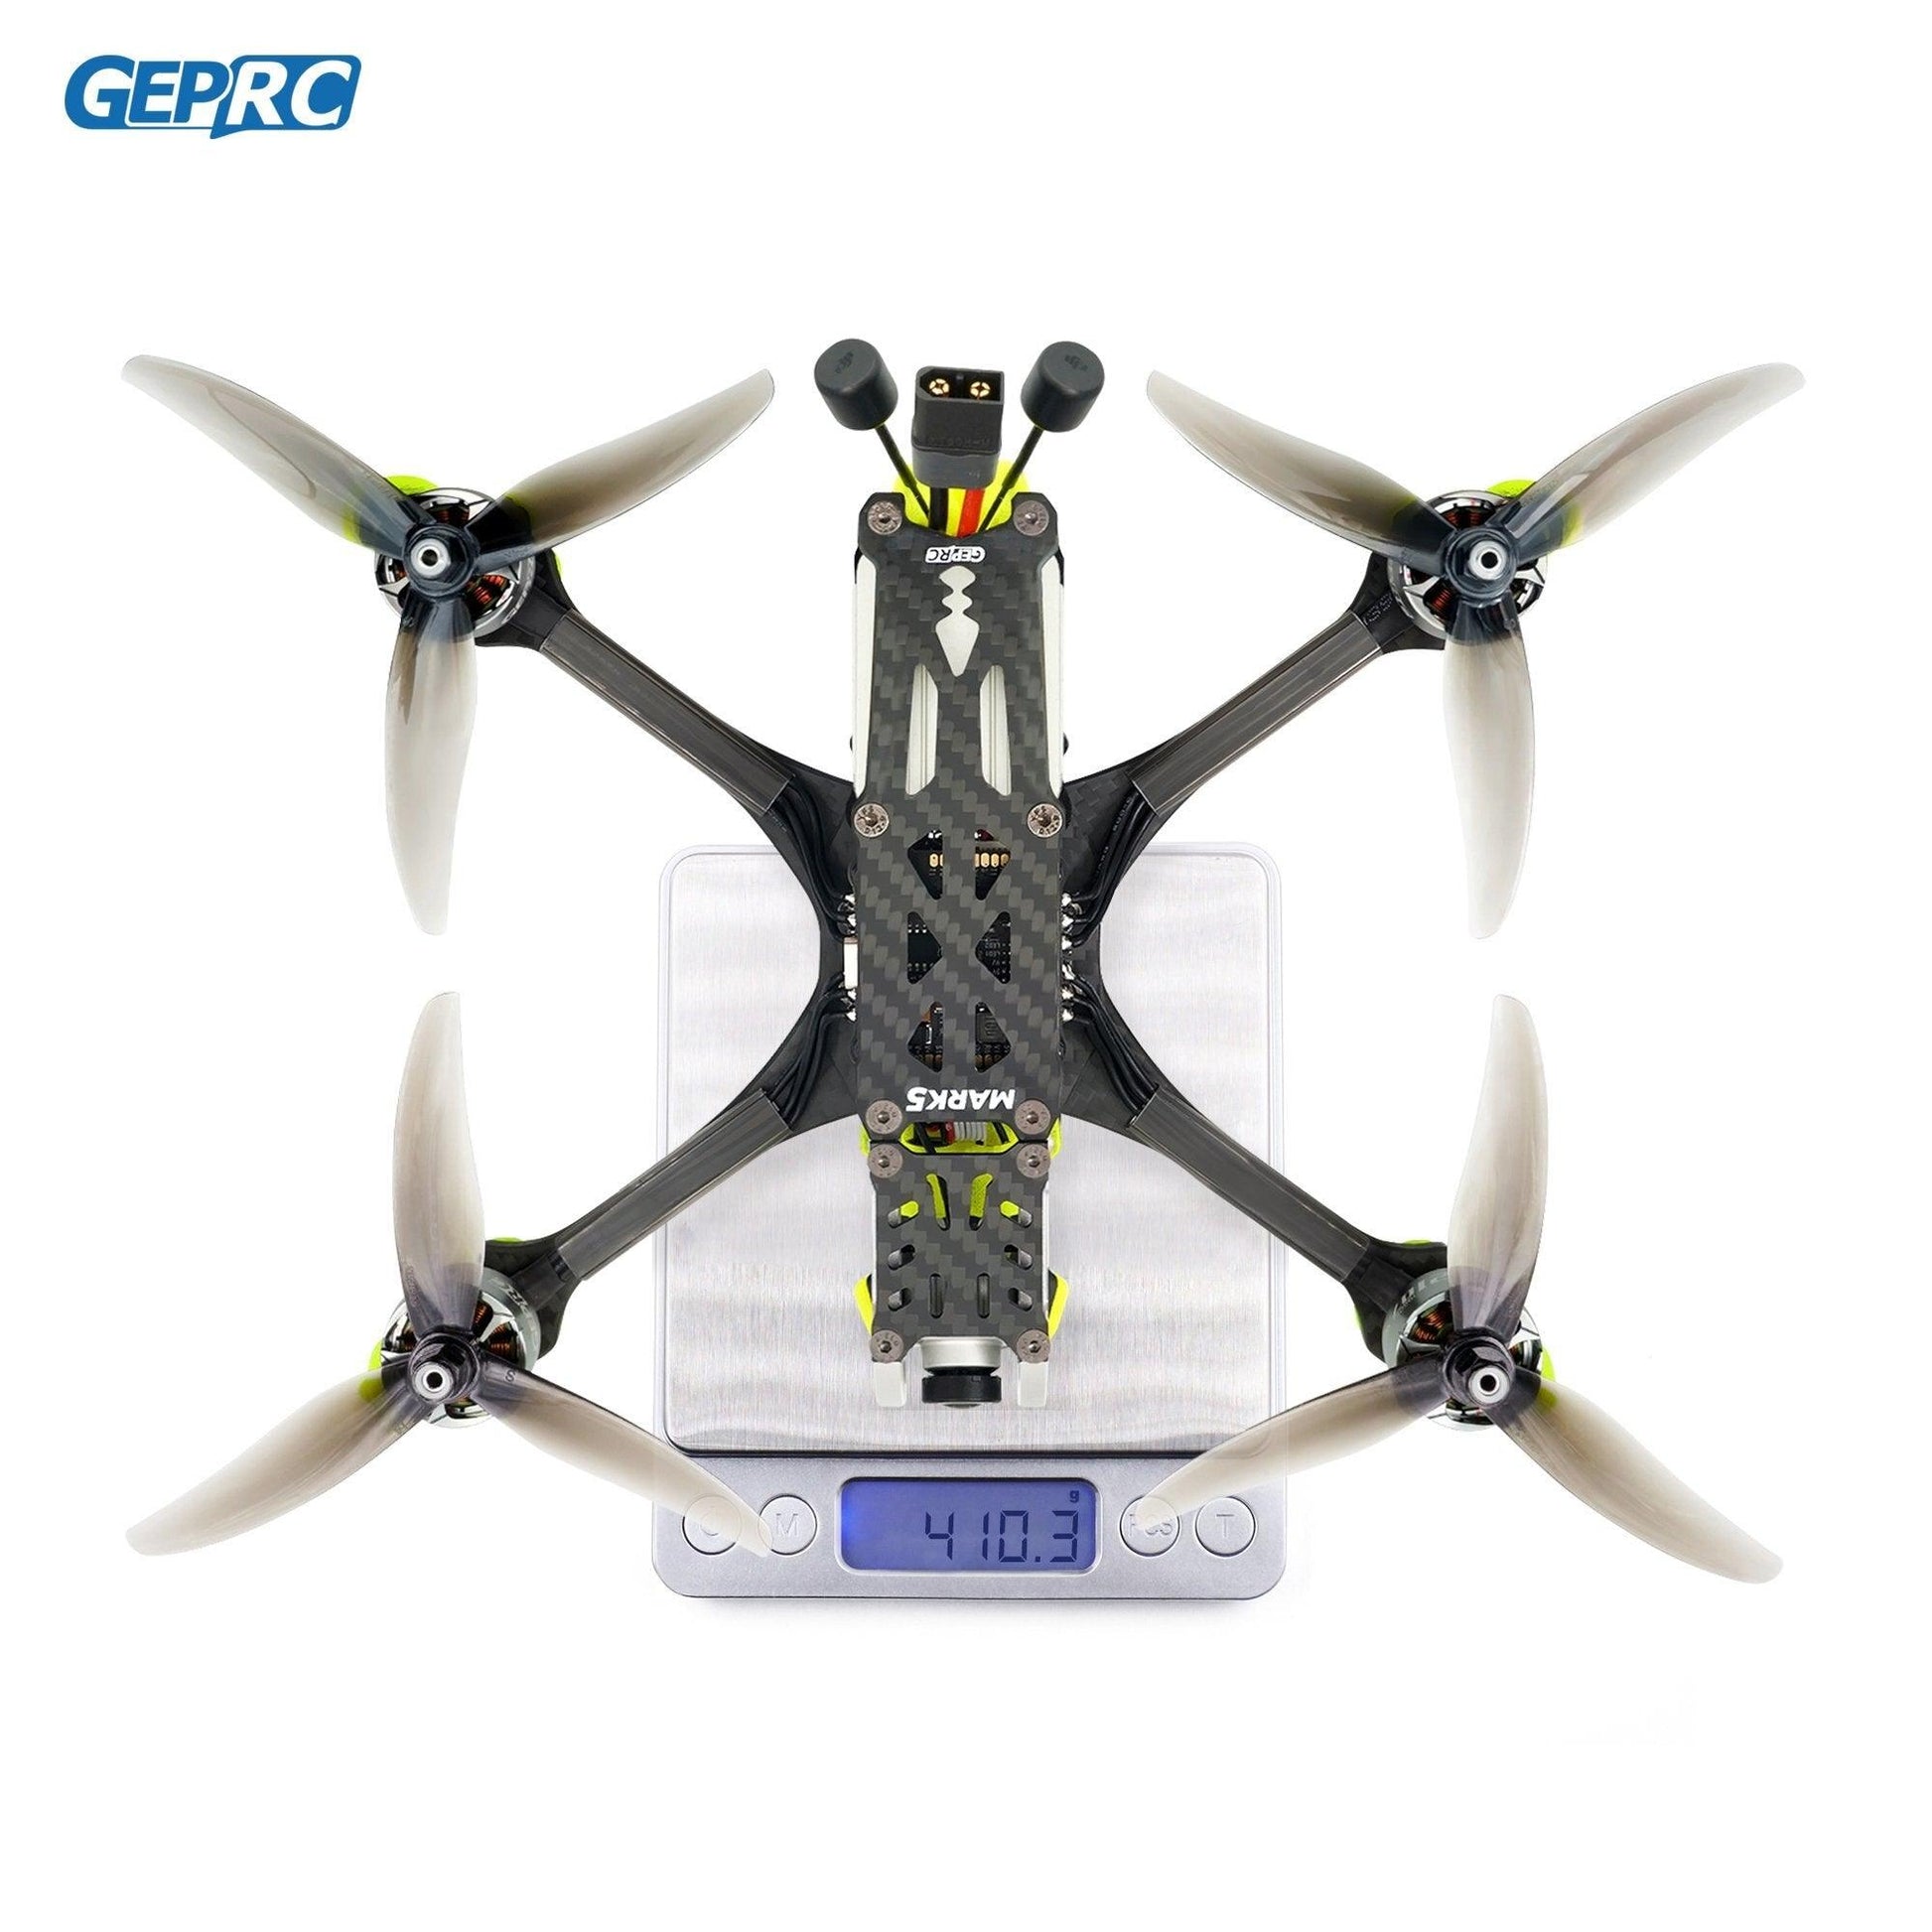 GEPRC MARK5 FPV Drone - HD DJI AIR UNIT Freestyle 4S/6S 5Inch SPEEDX2 2107.5 Motor For RC FPV Quadcopter LongRange Freestyle Drone - RCDrone